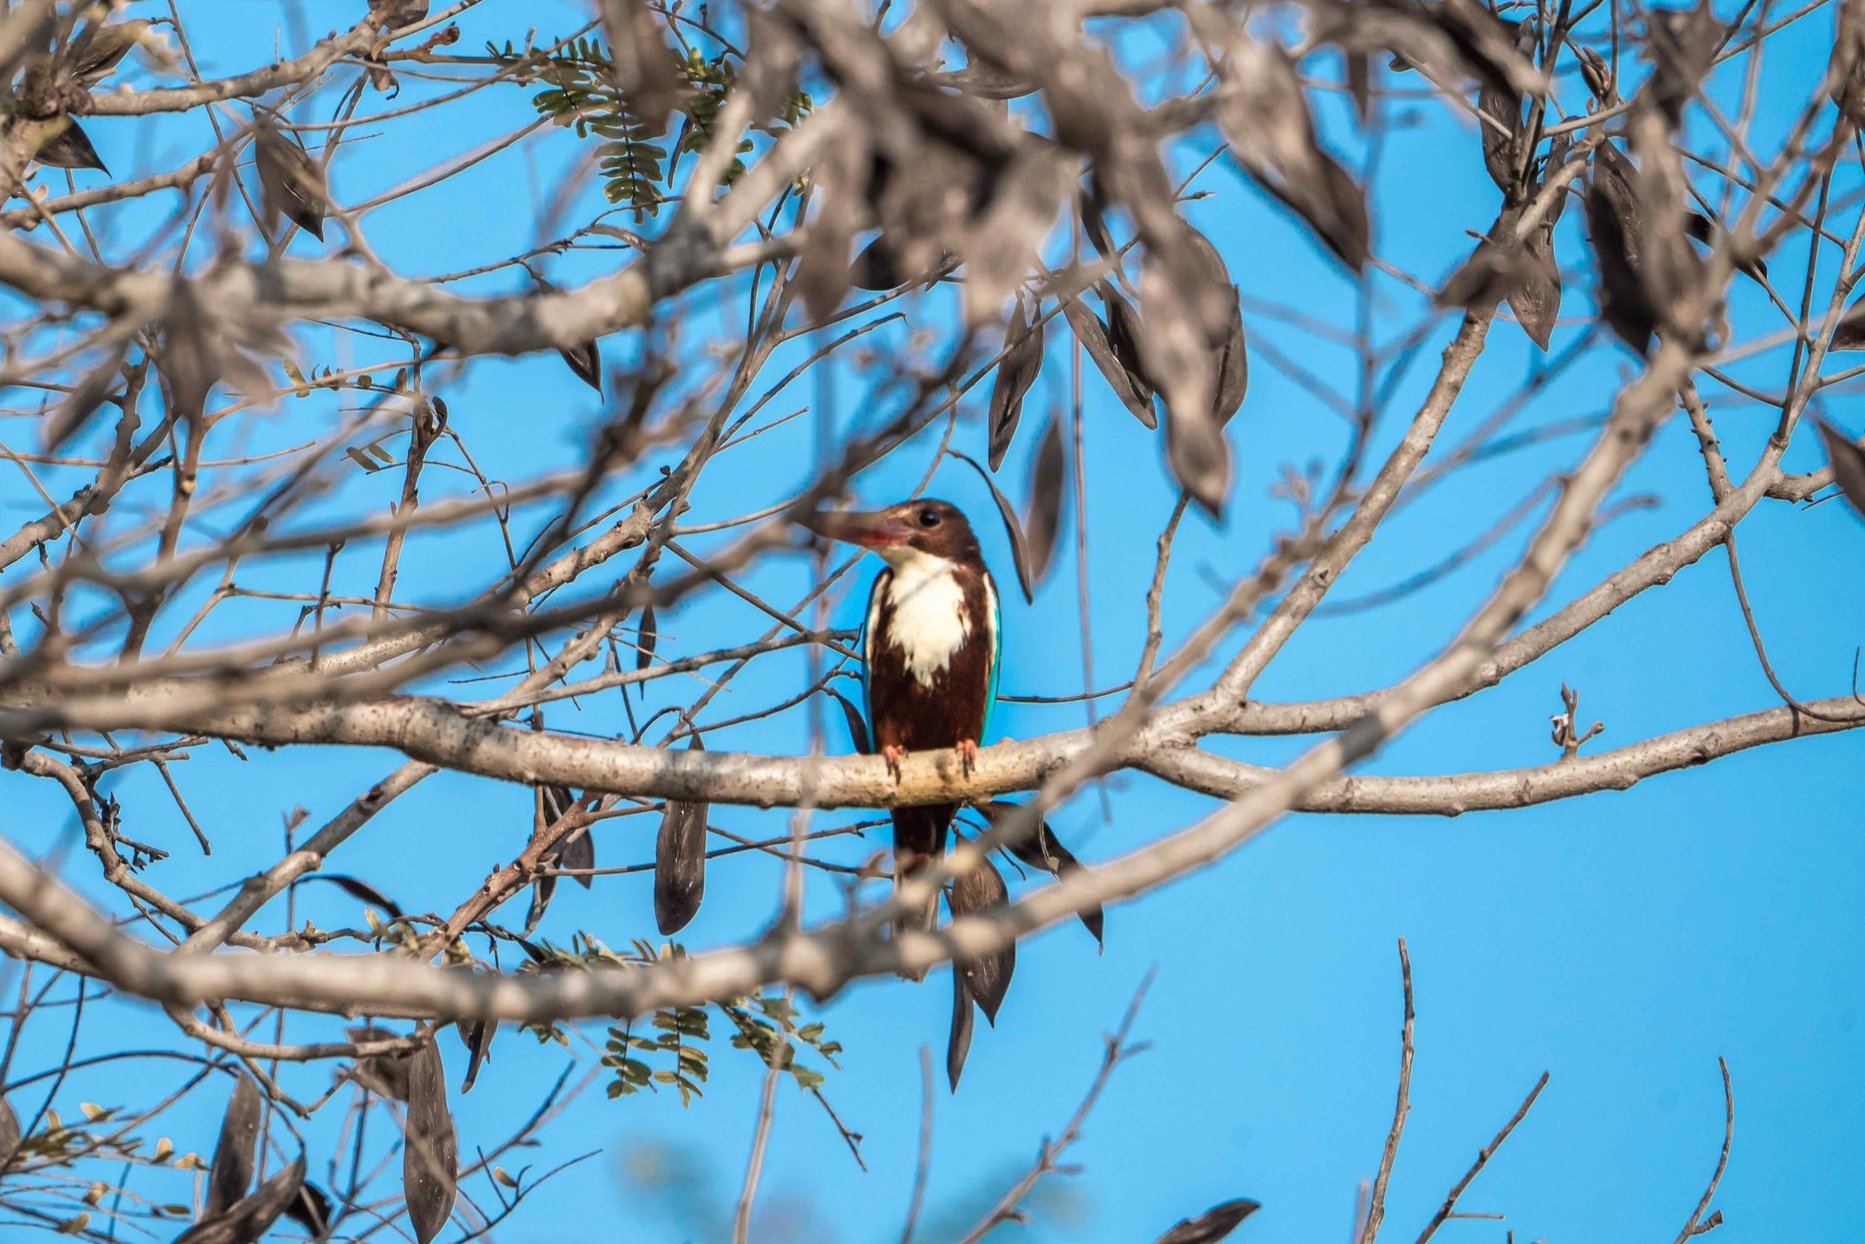 White throated kingfisher [Halcyon smyrnensis]